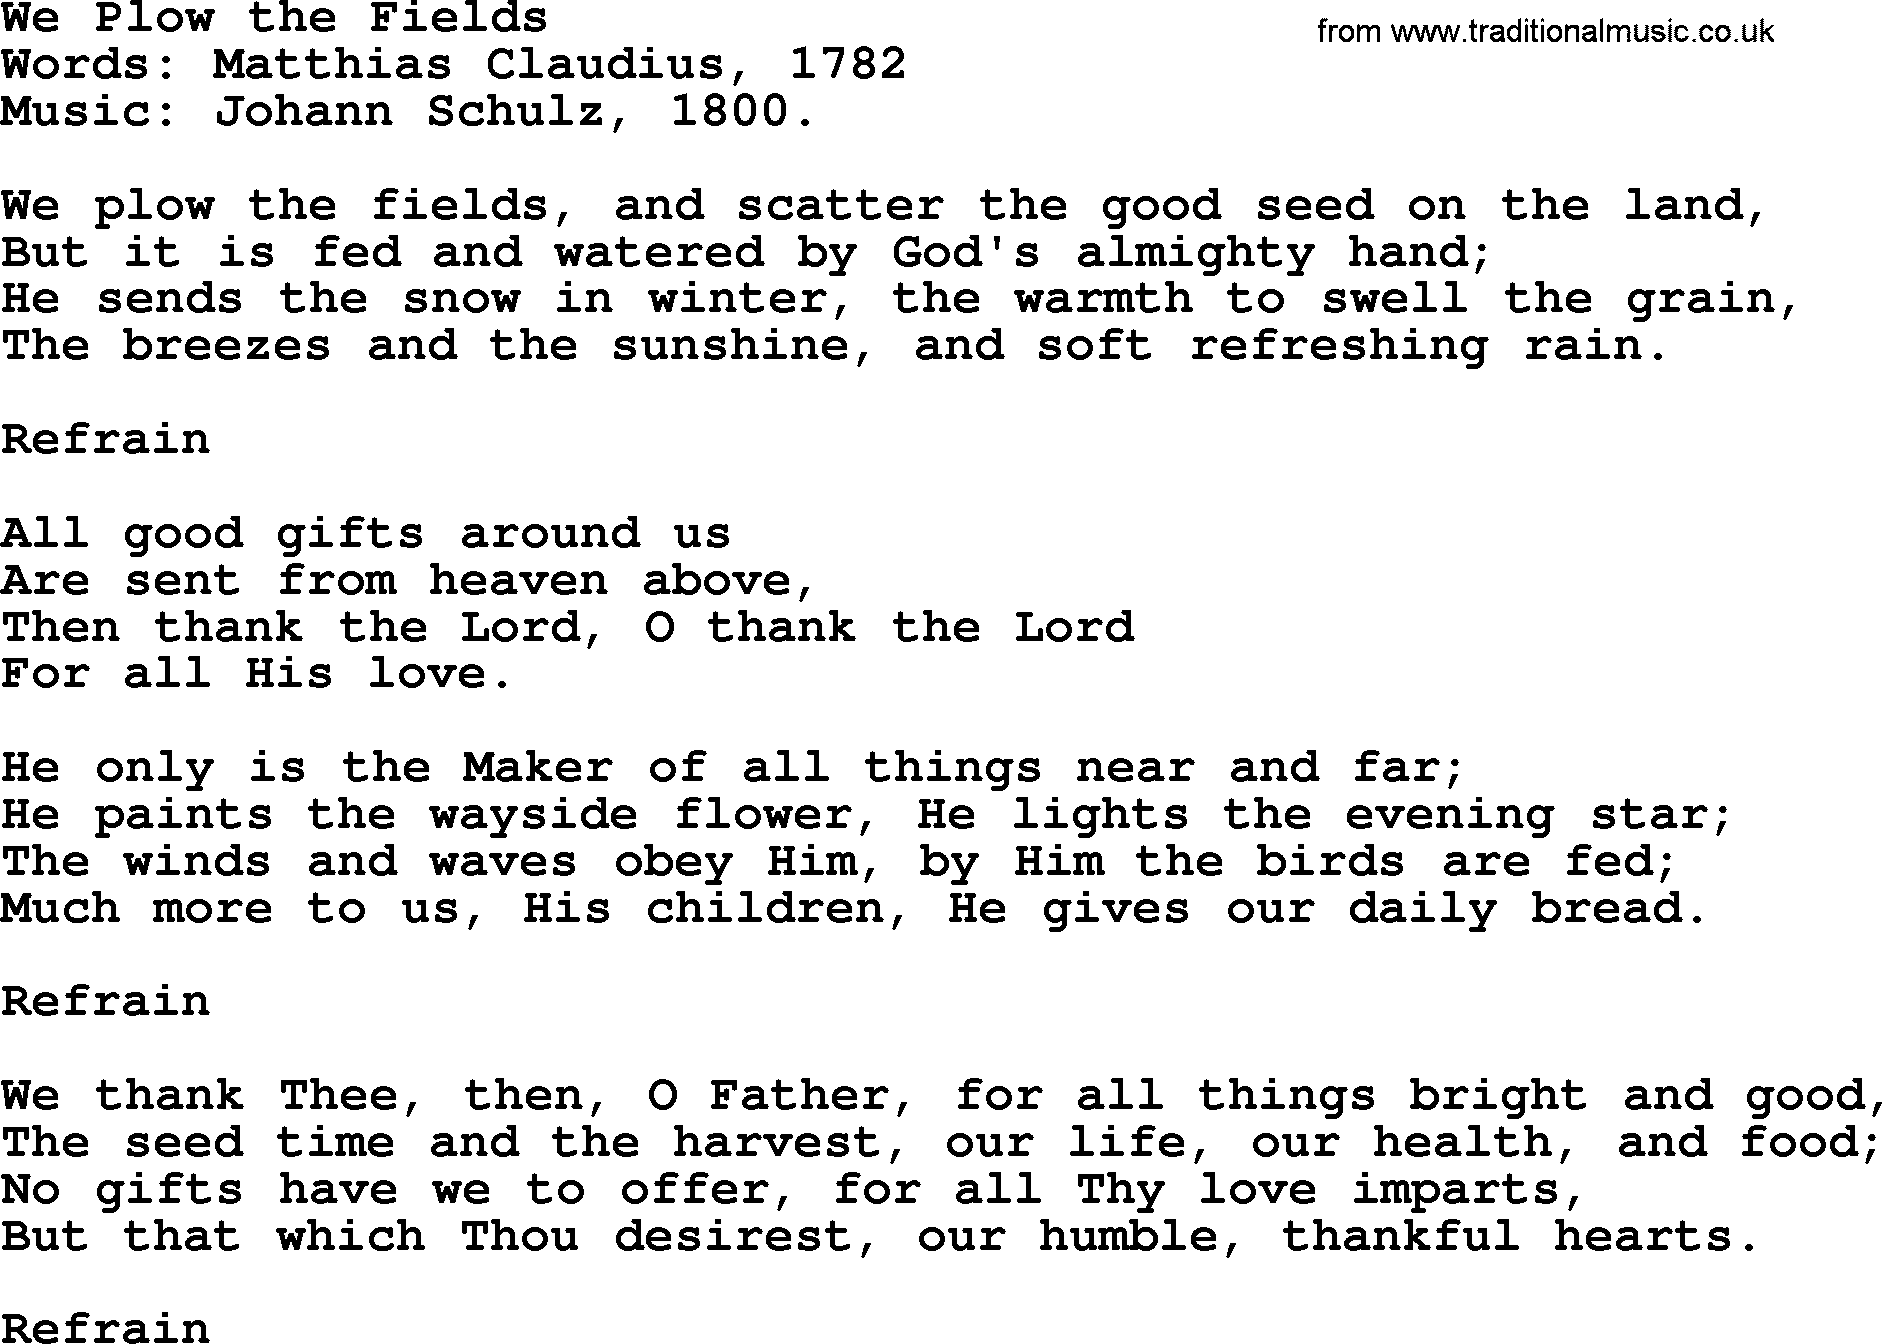 Thanksgiving Hymns and Songs: We Plow The Fields lyrics with PDF